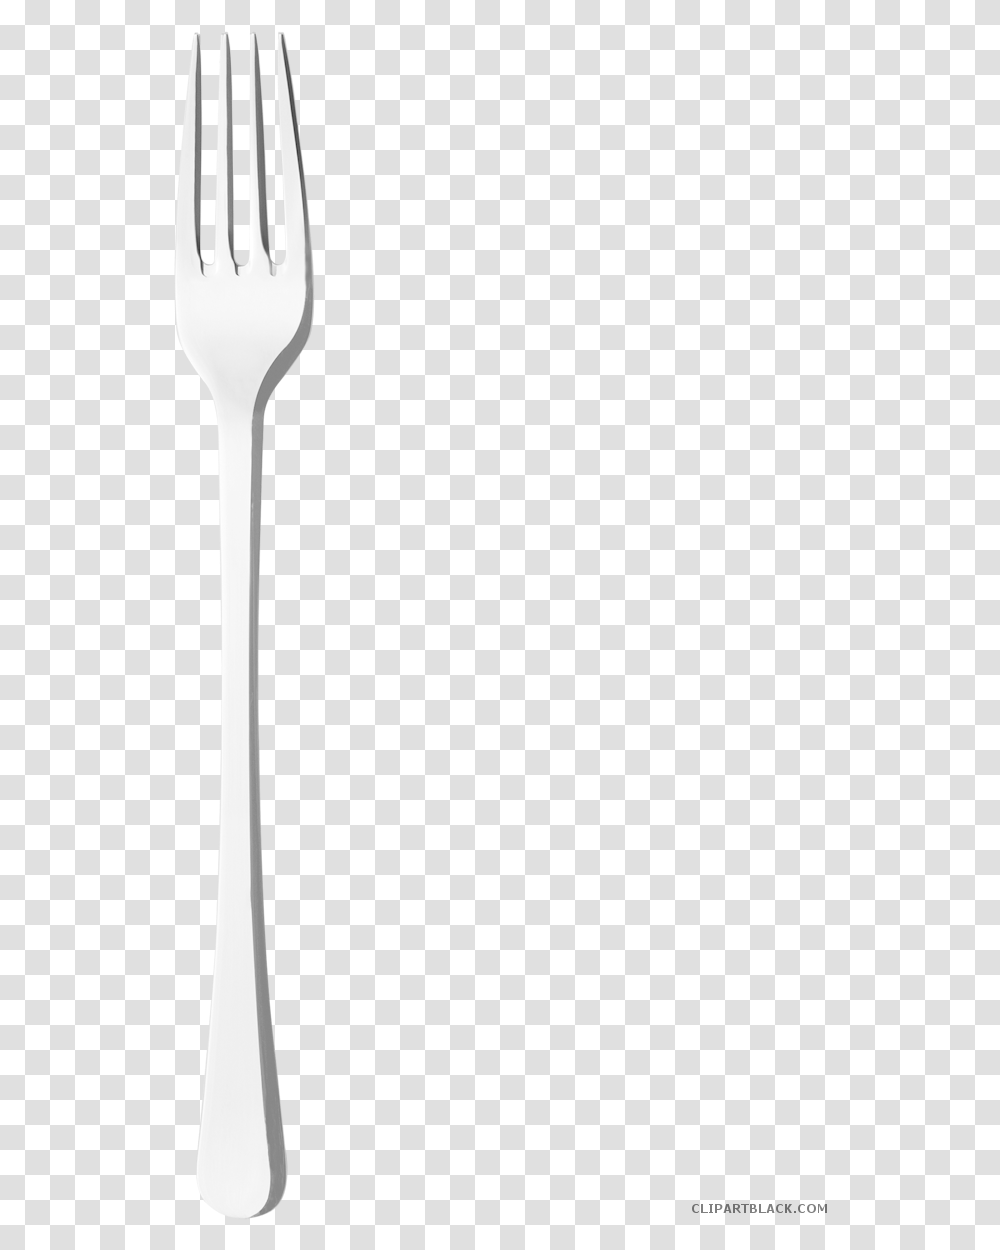 Tools Free Images Clipartblack, Fork, Cutlery, Spoon Transparent Png